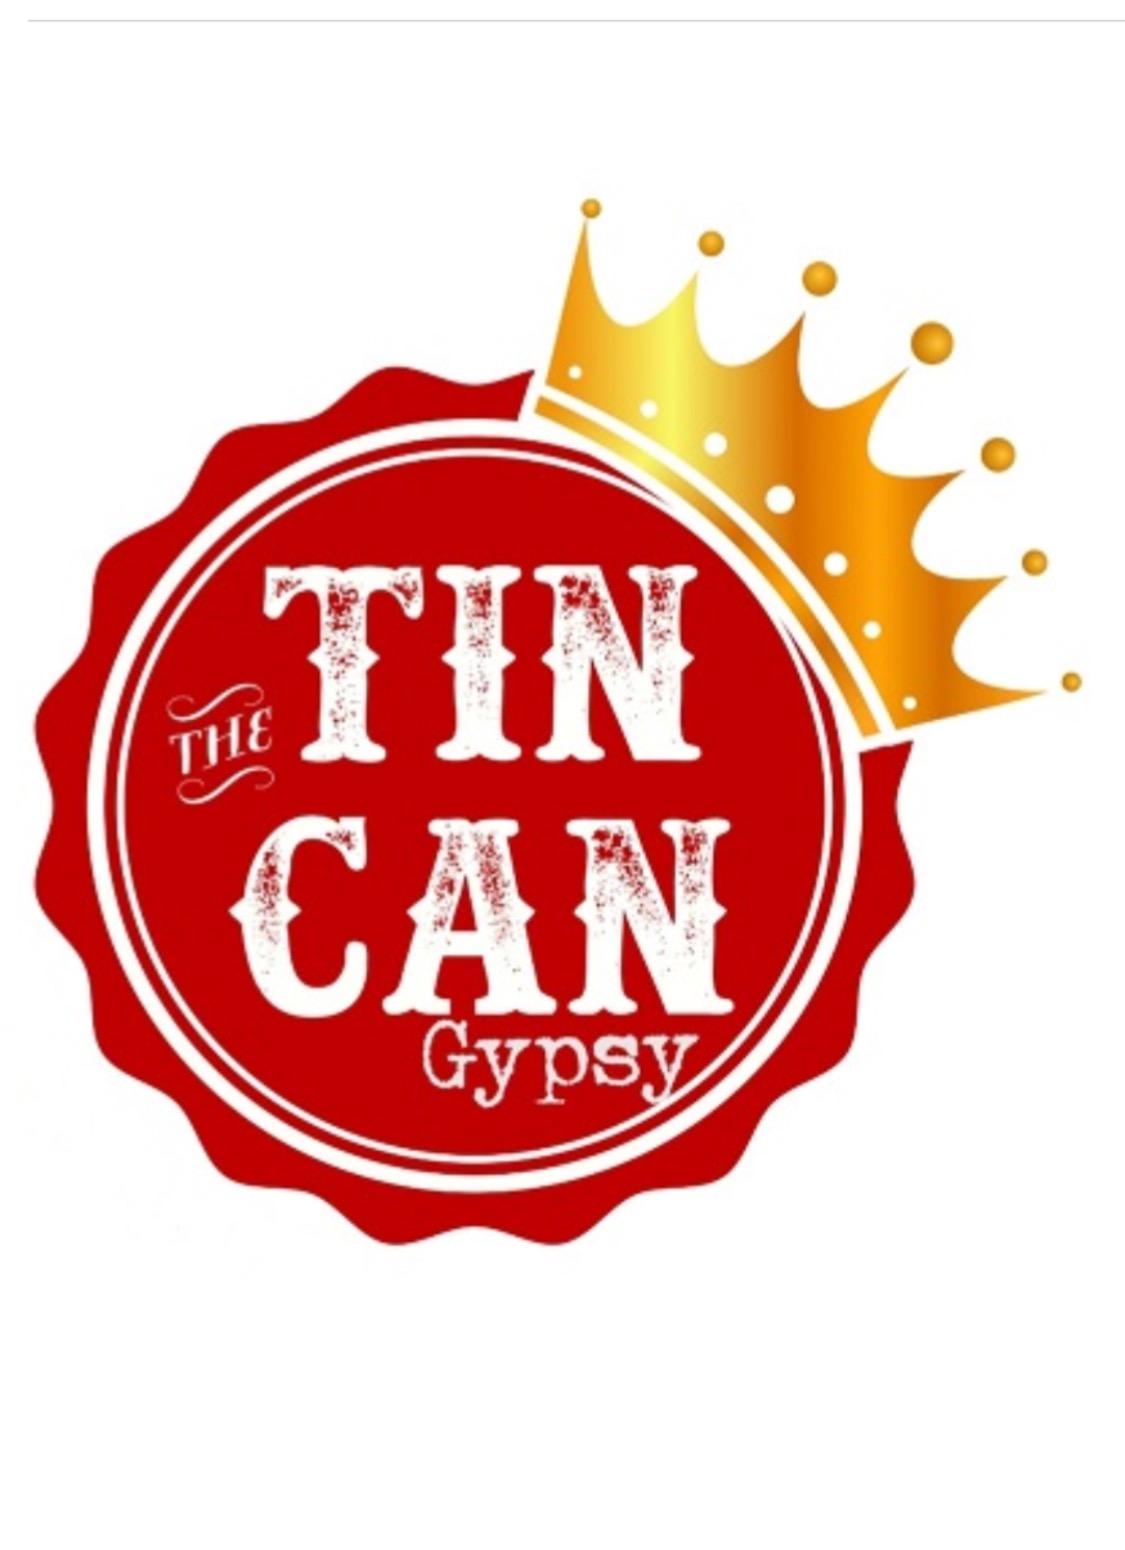 The Tin Can Gypsy